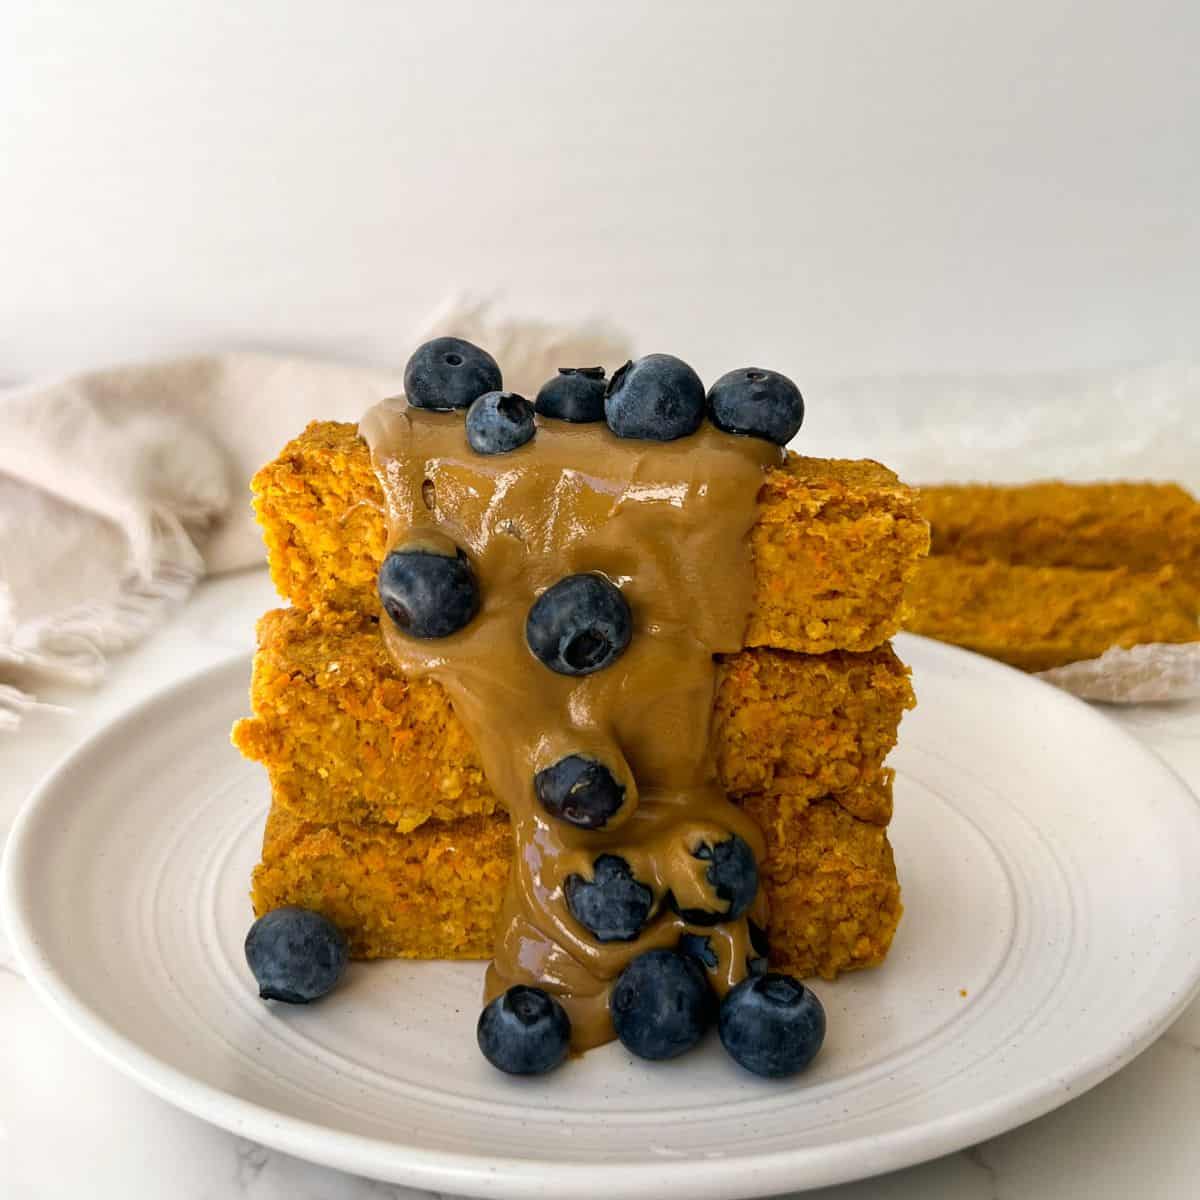 3 carrot cake oatmeal bars stacked and topped with sunflower butter and fresh blueberries